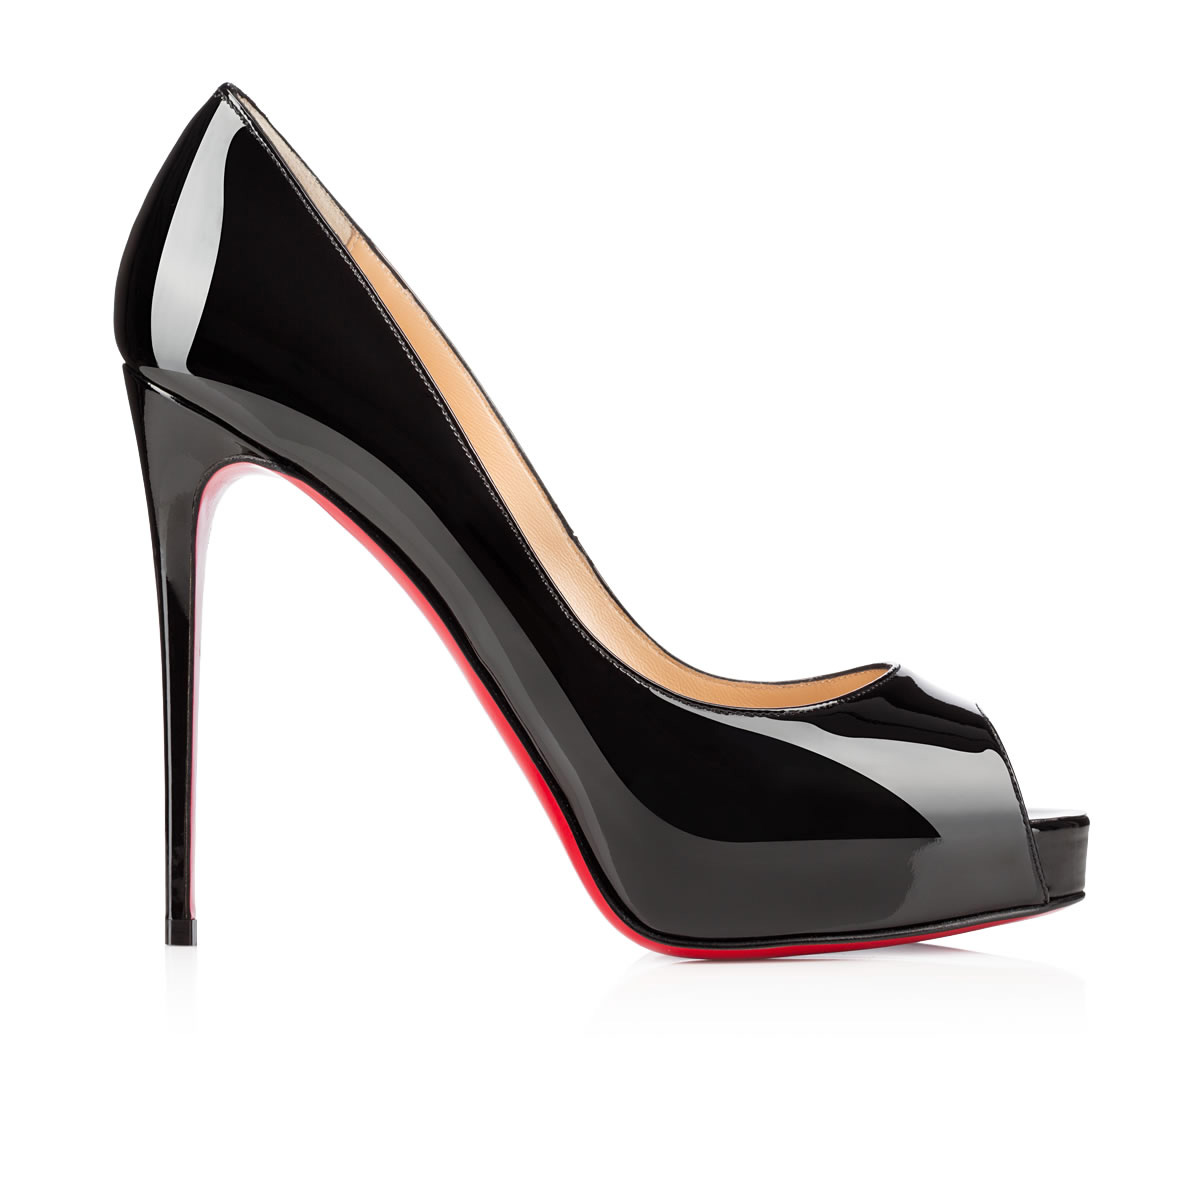 christian louboutin heels 38.5 Very Prive Patent Red Sole Pumps